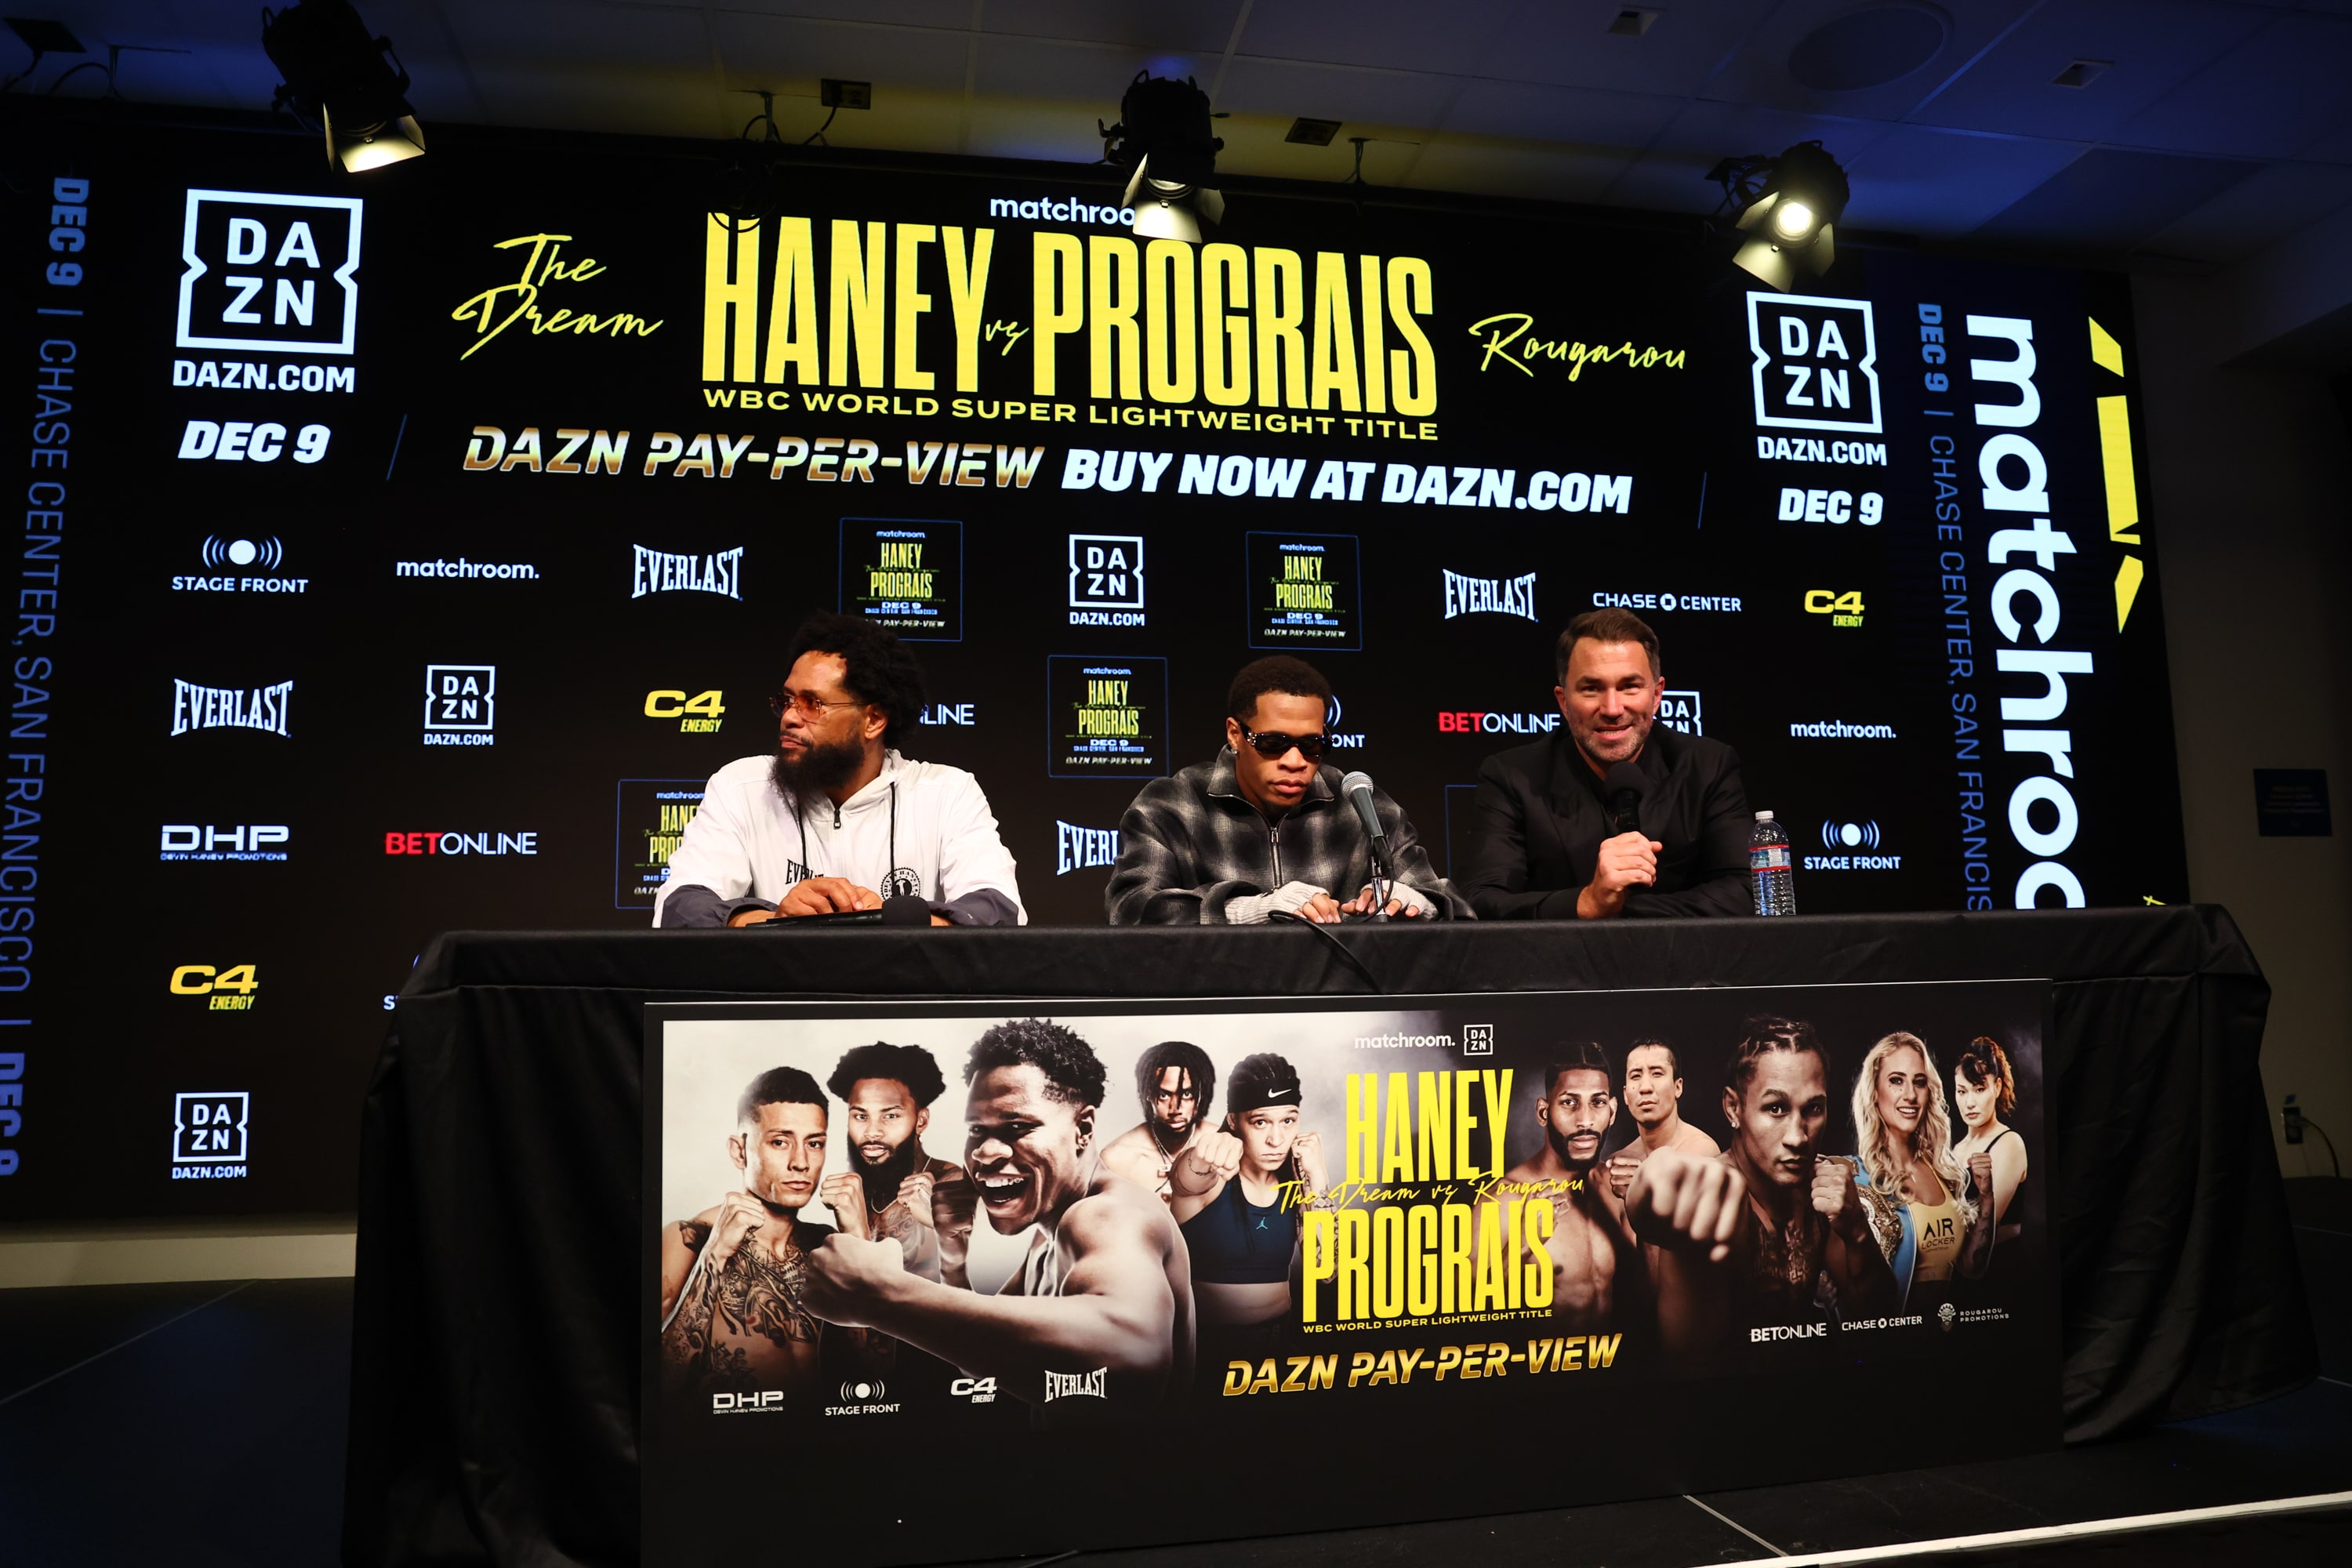 Prograis-Haney fight week diary: Day Four